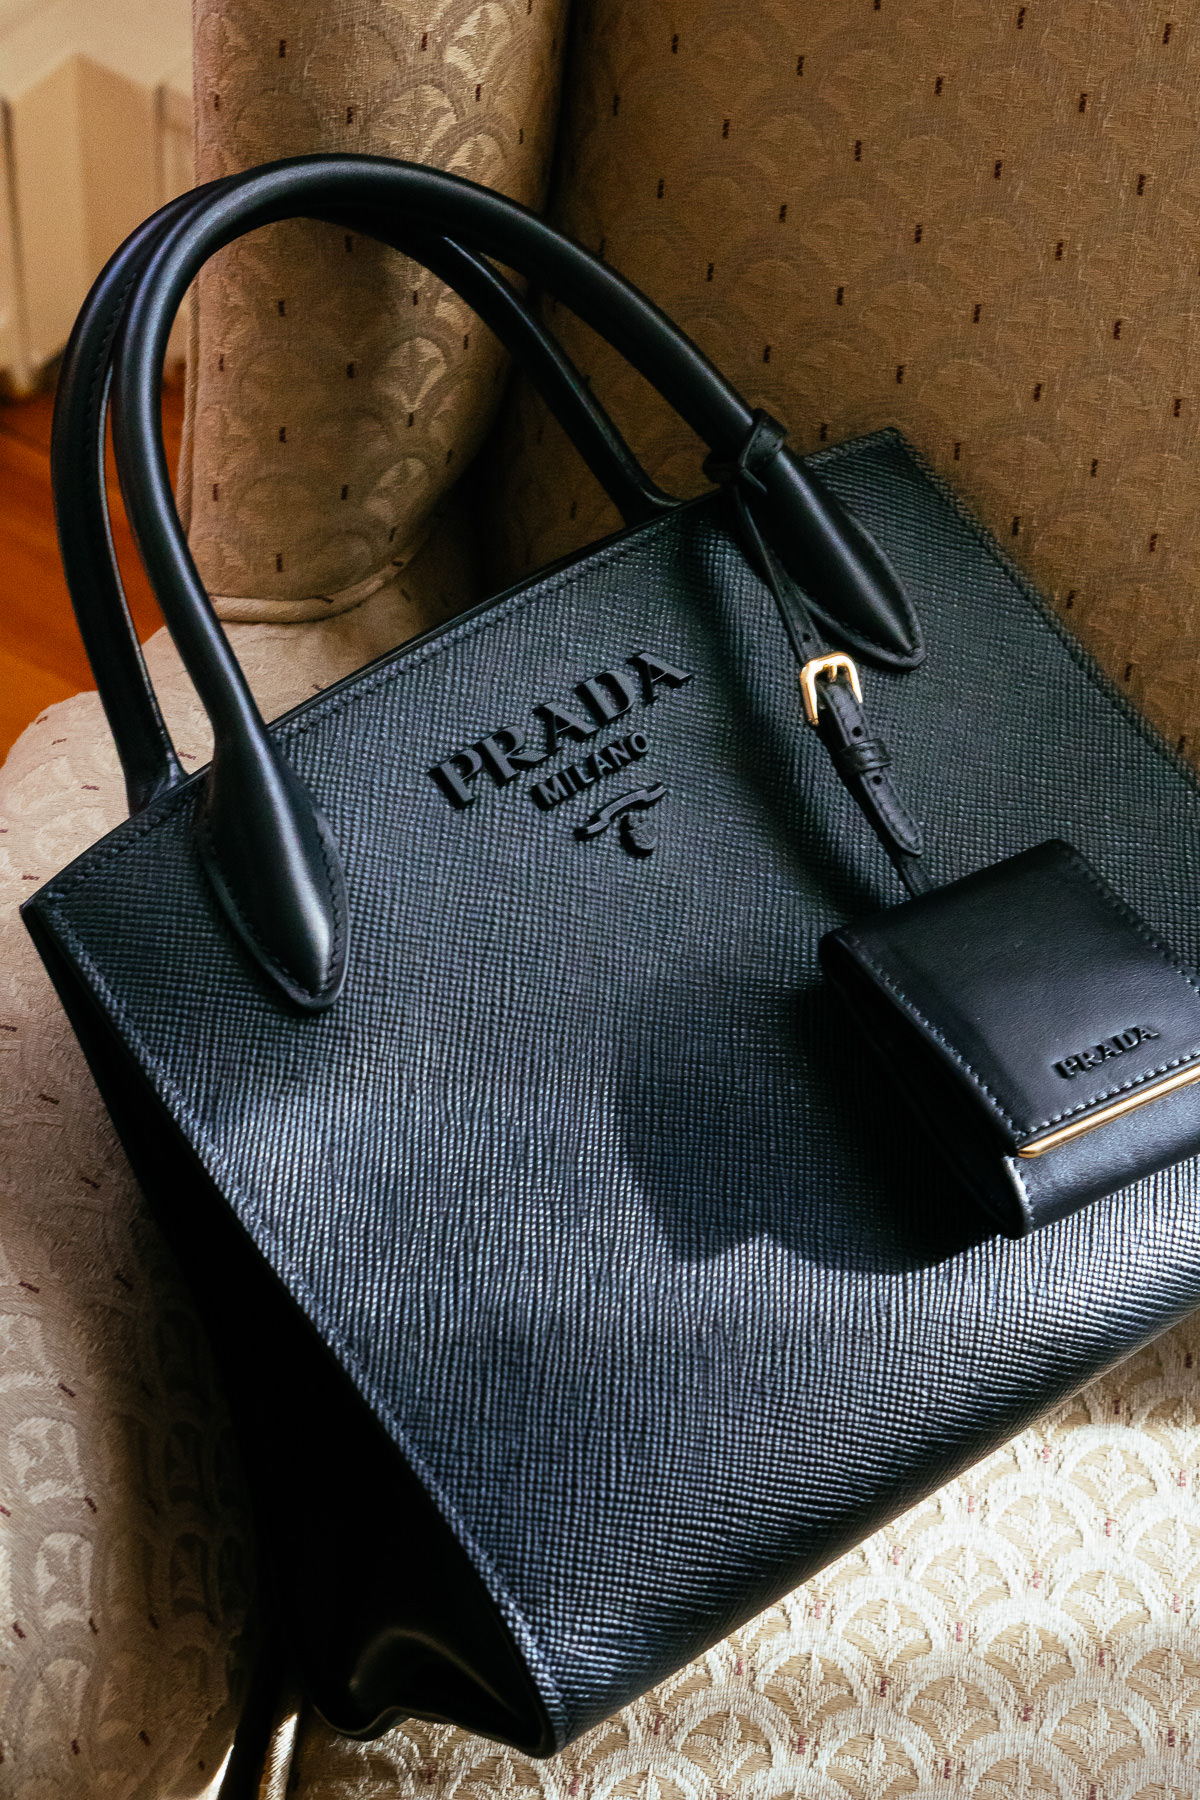 Loving Lately: Functional and Incredibly Chic, the Prada Monochrome Bag  Stole My Heart - PurseBlog